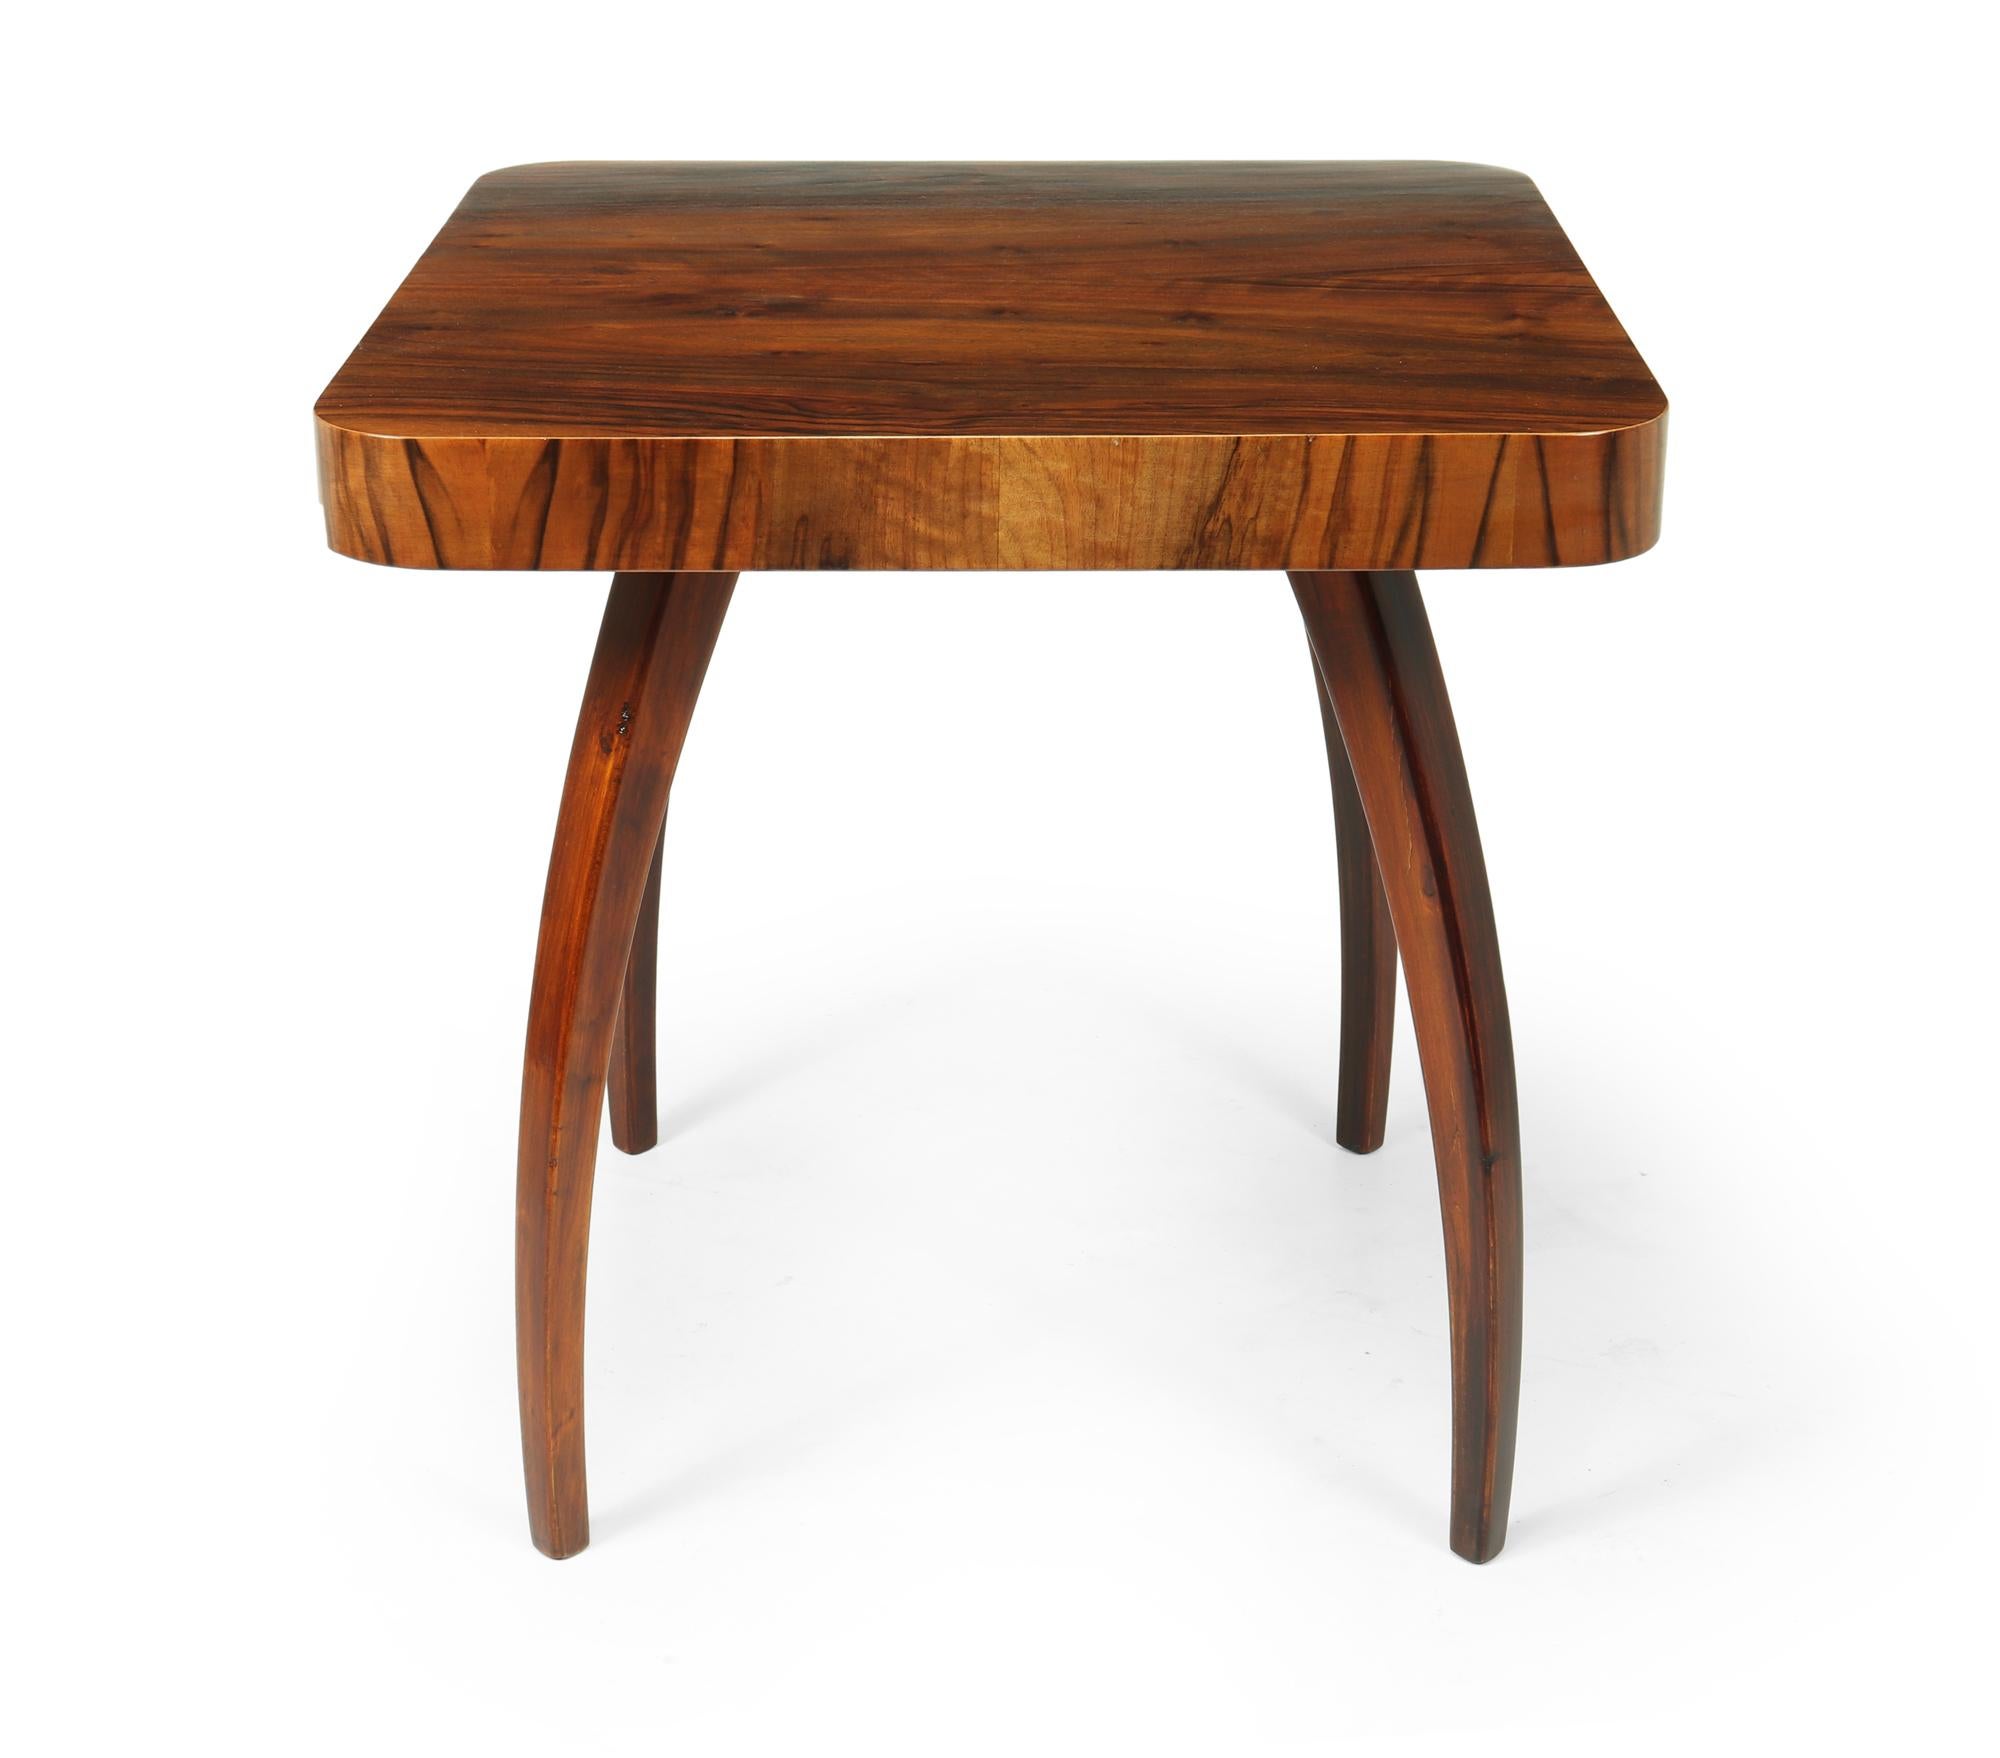 A Classic eastern European spider table designed by Jindrich Halaba in the 1950’s this example having a walnut top and solid beech shaped legs, fully restored and hand polished and in excellent condition throughout.

Age: 1950

Style: Mid